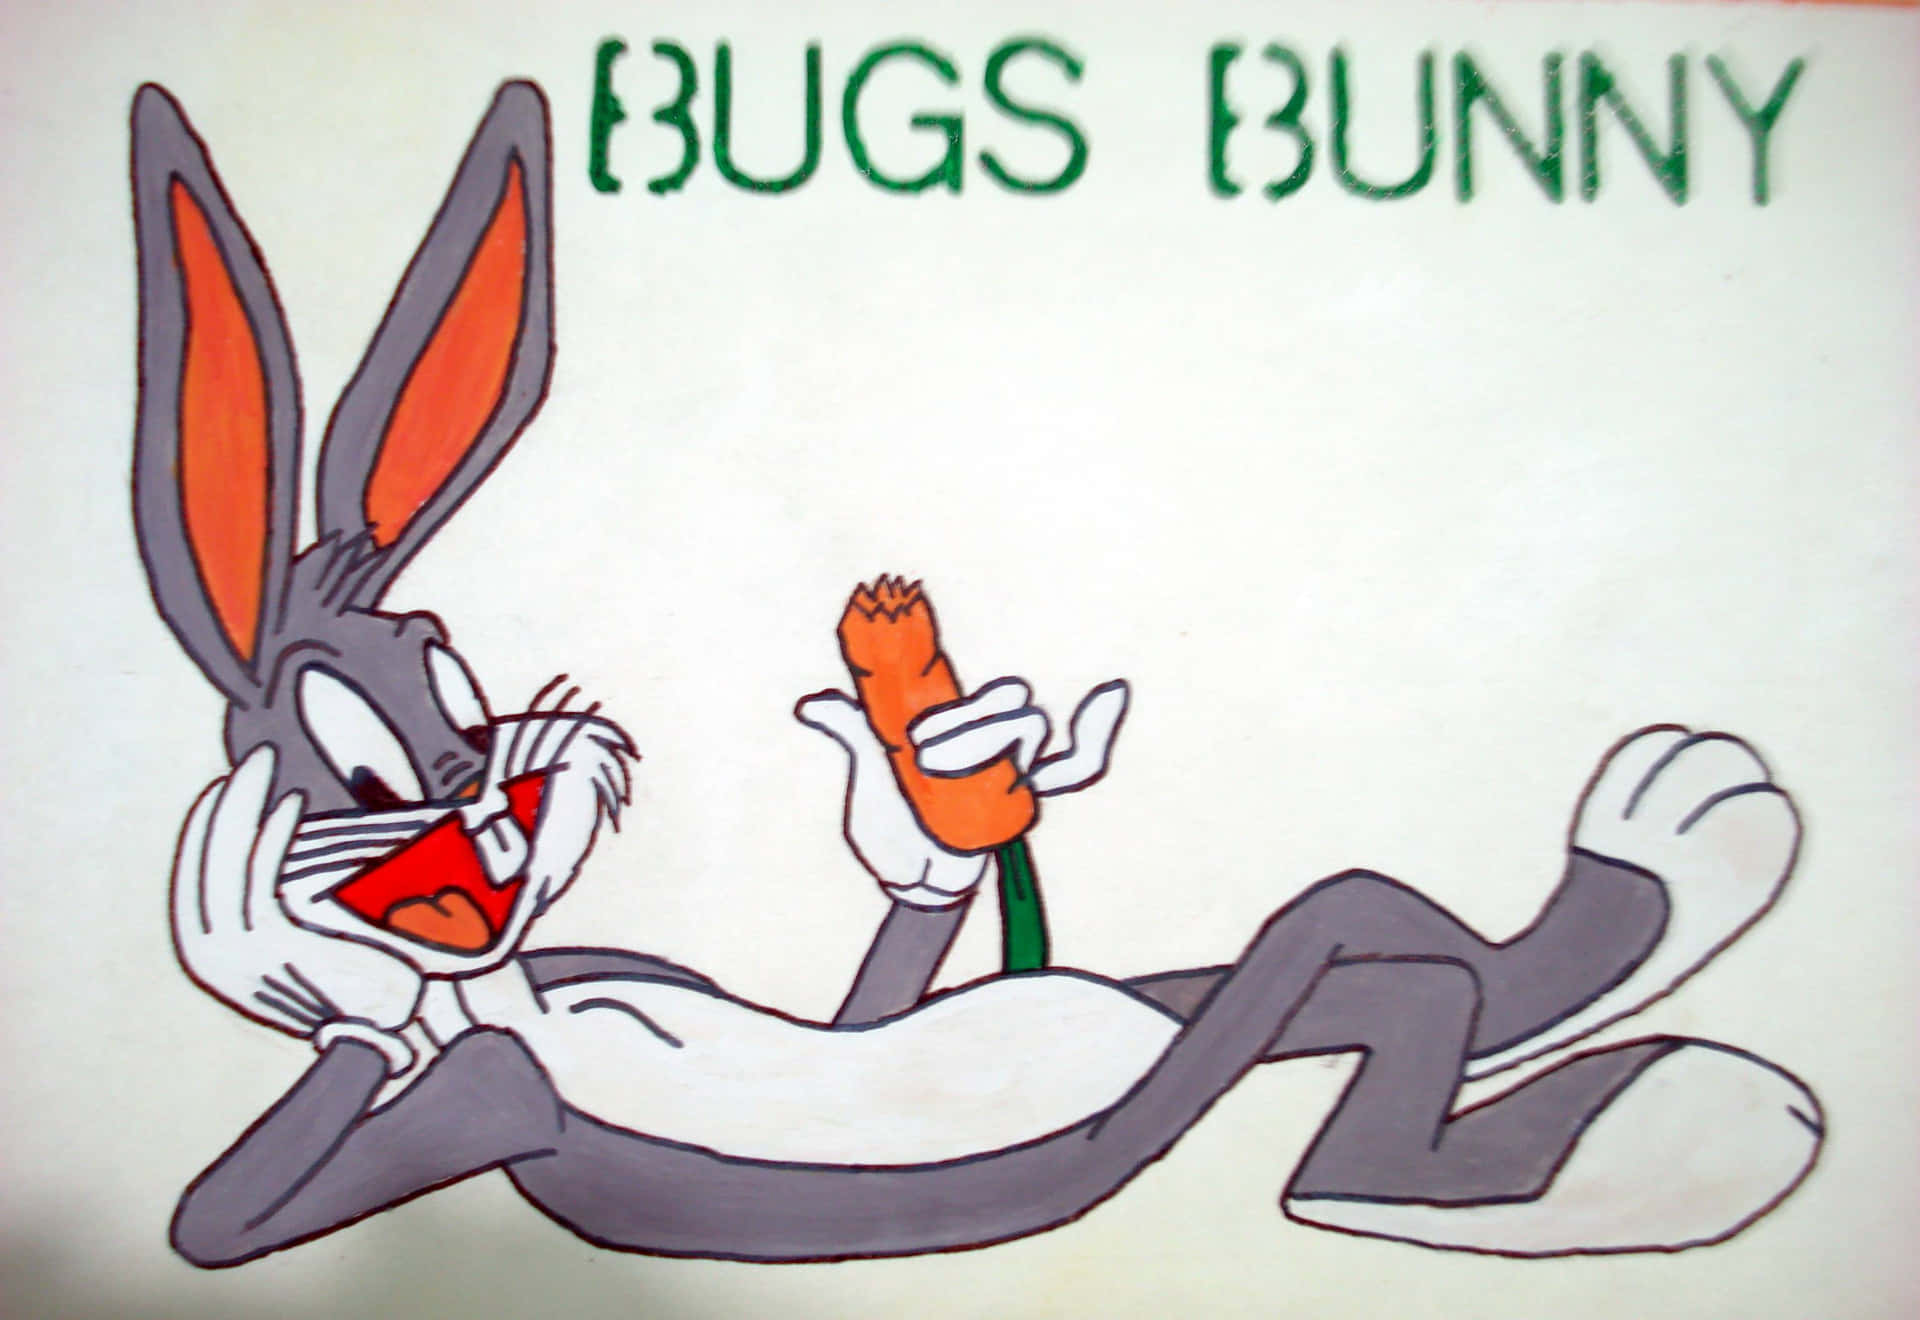 What's Up Doc? It's Bugs Bunny!"